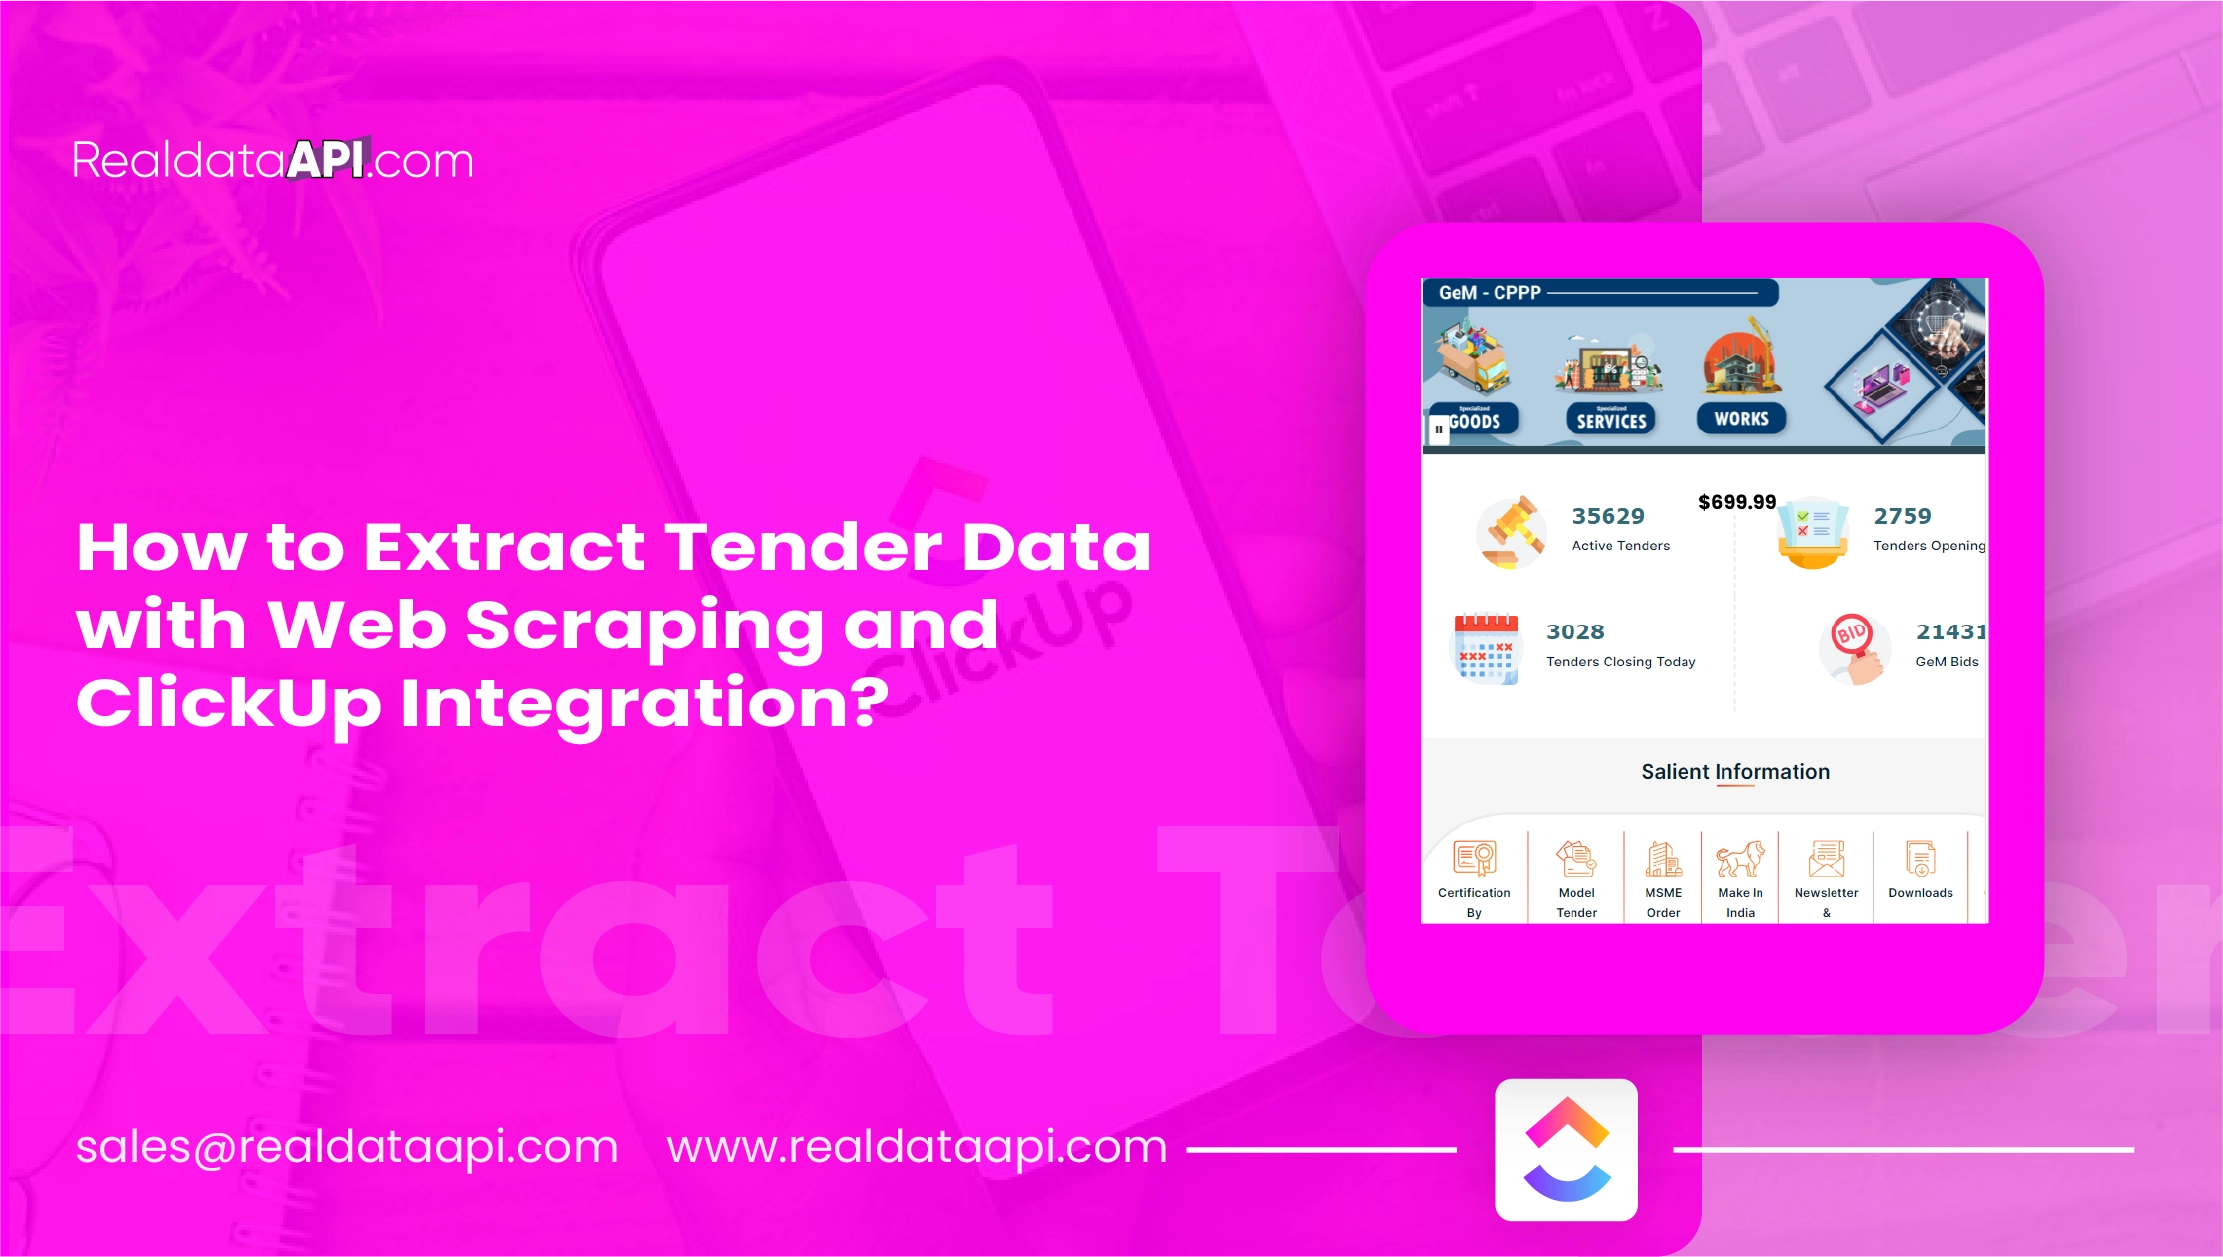 How-to-Extract-Tender-Data-with-Web-Scraping-and-ClickUp-Integration-01